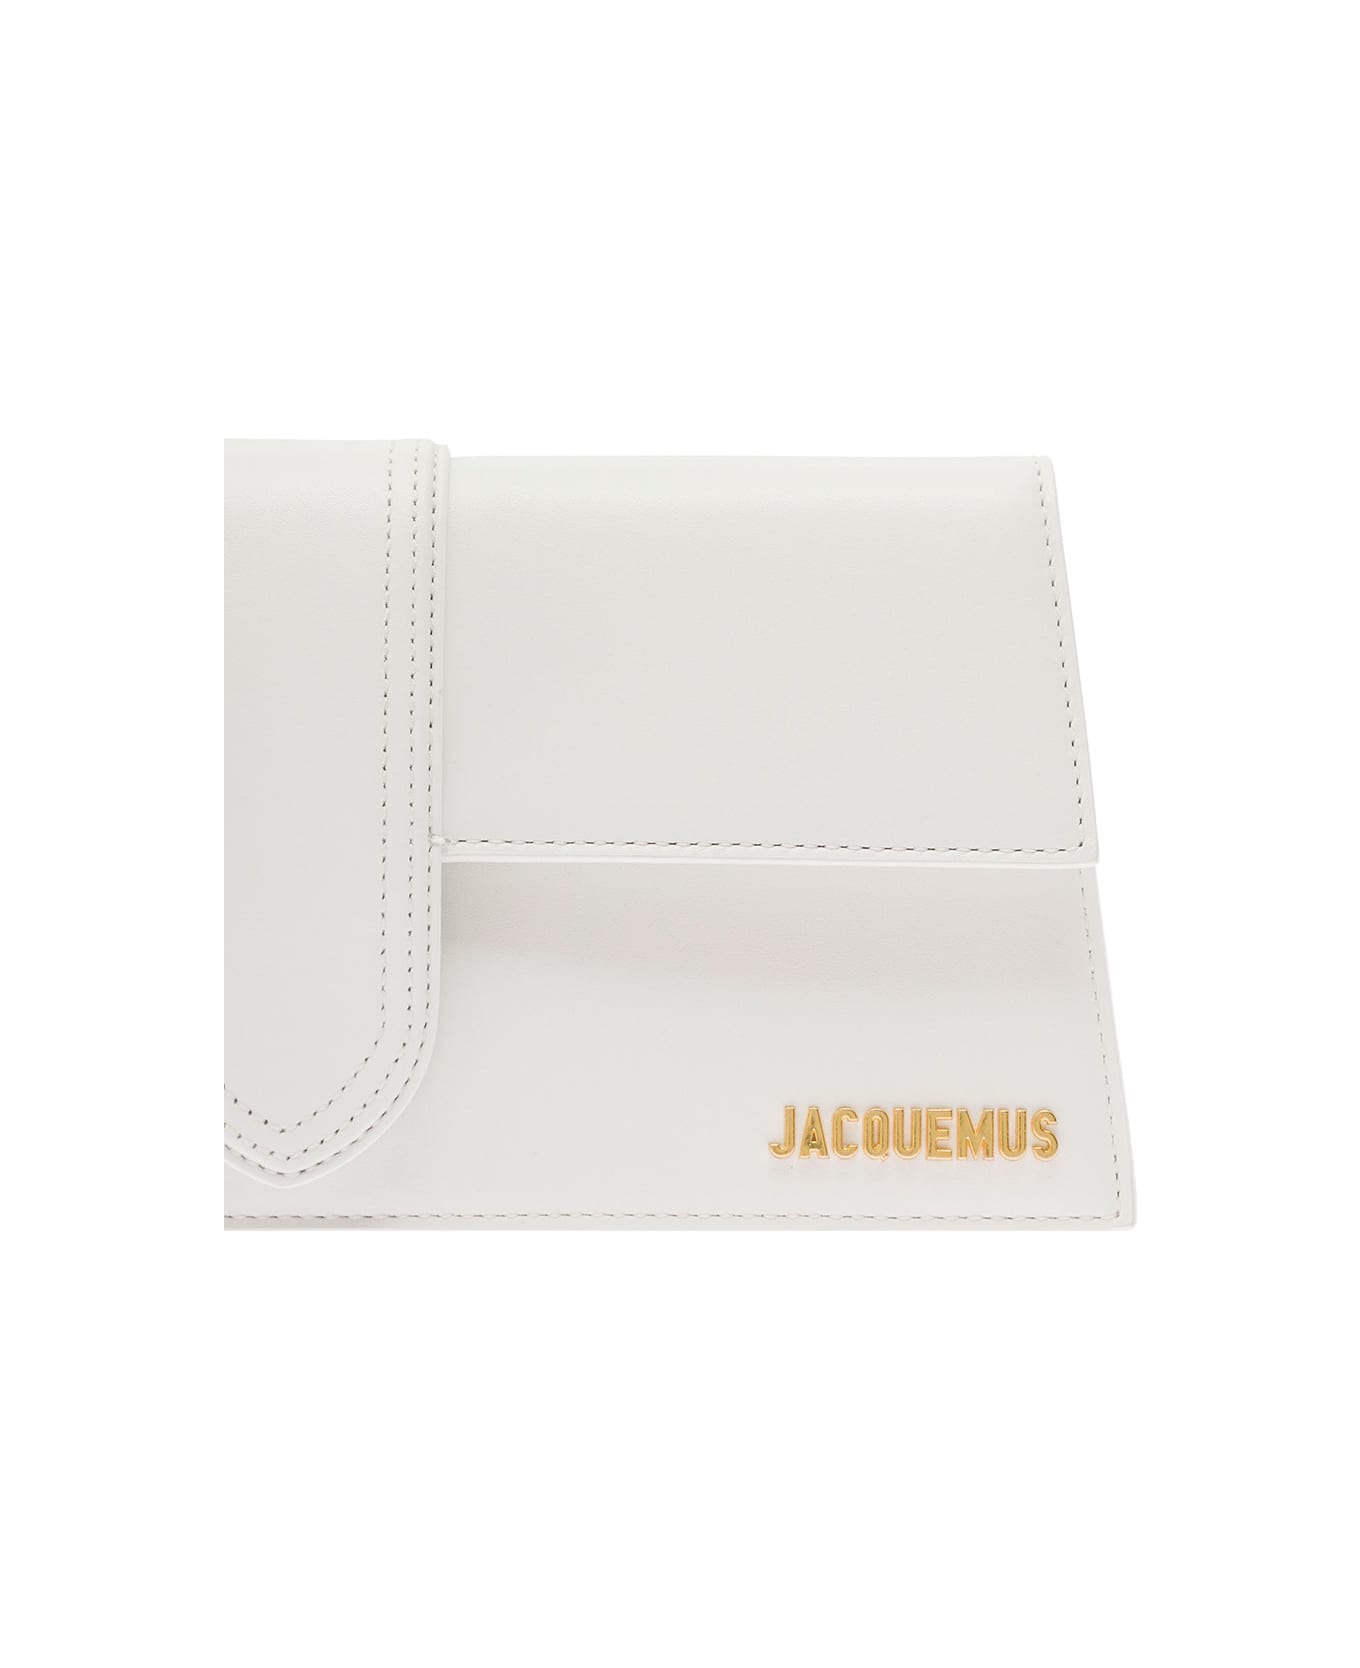 Jacquemus 'le Bambino Long' White Handbag With Removable Shoulder Strap In Leather Woman - White